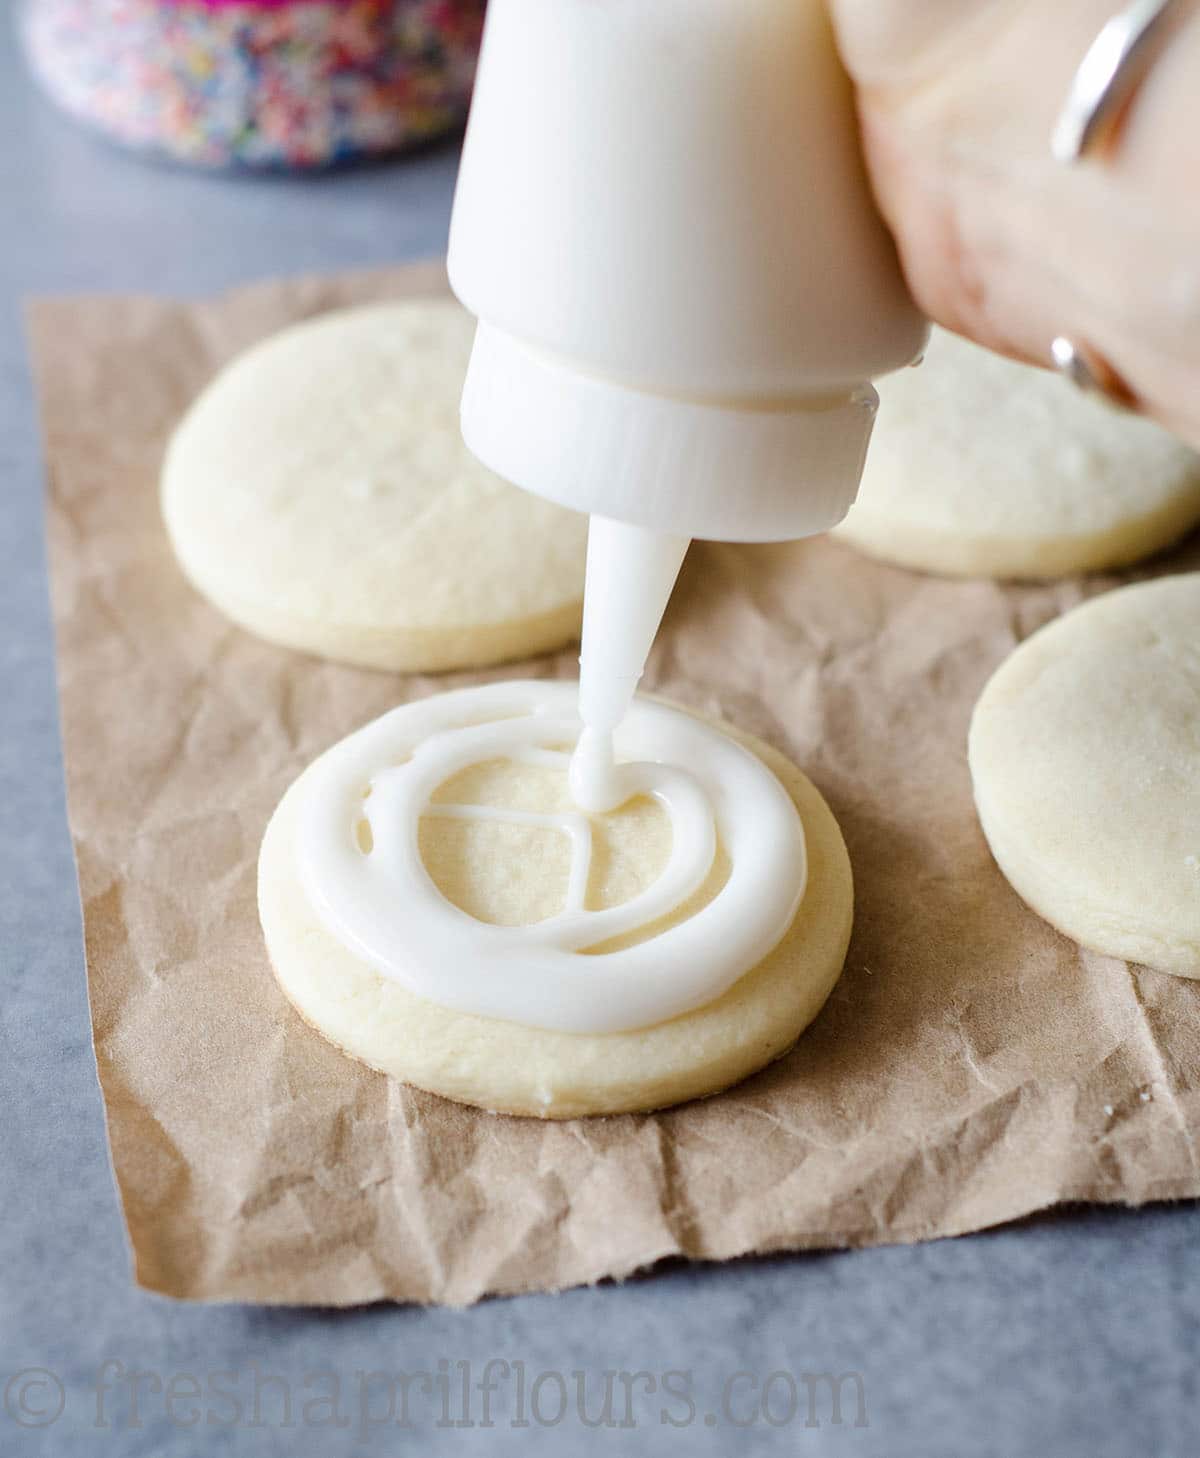 a hand squeezing royal icing onto a cut-out sugar cookie